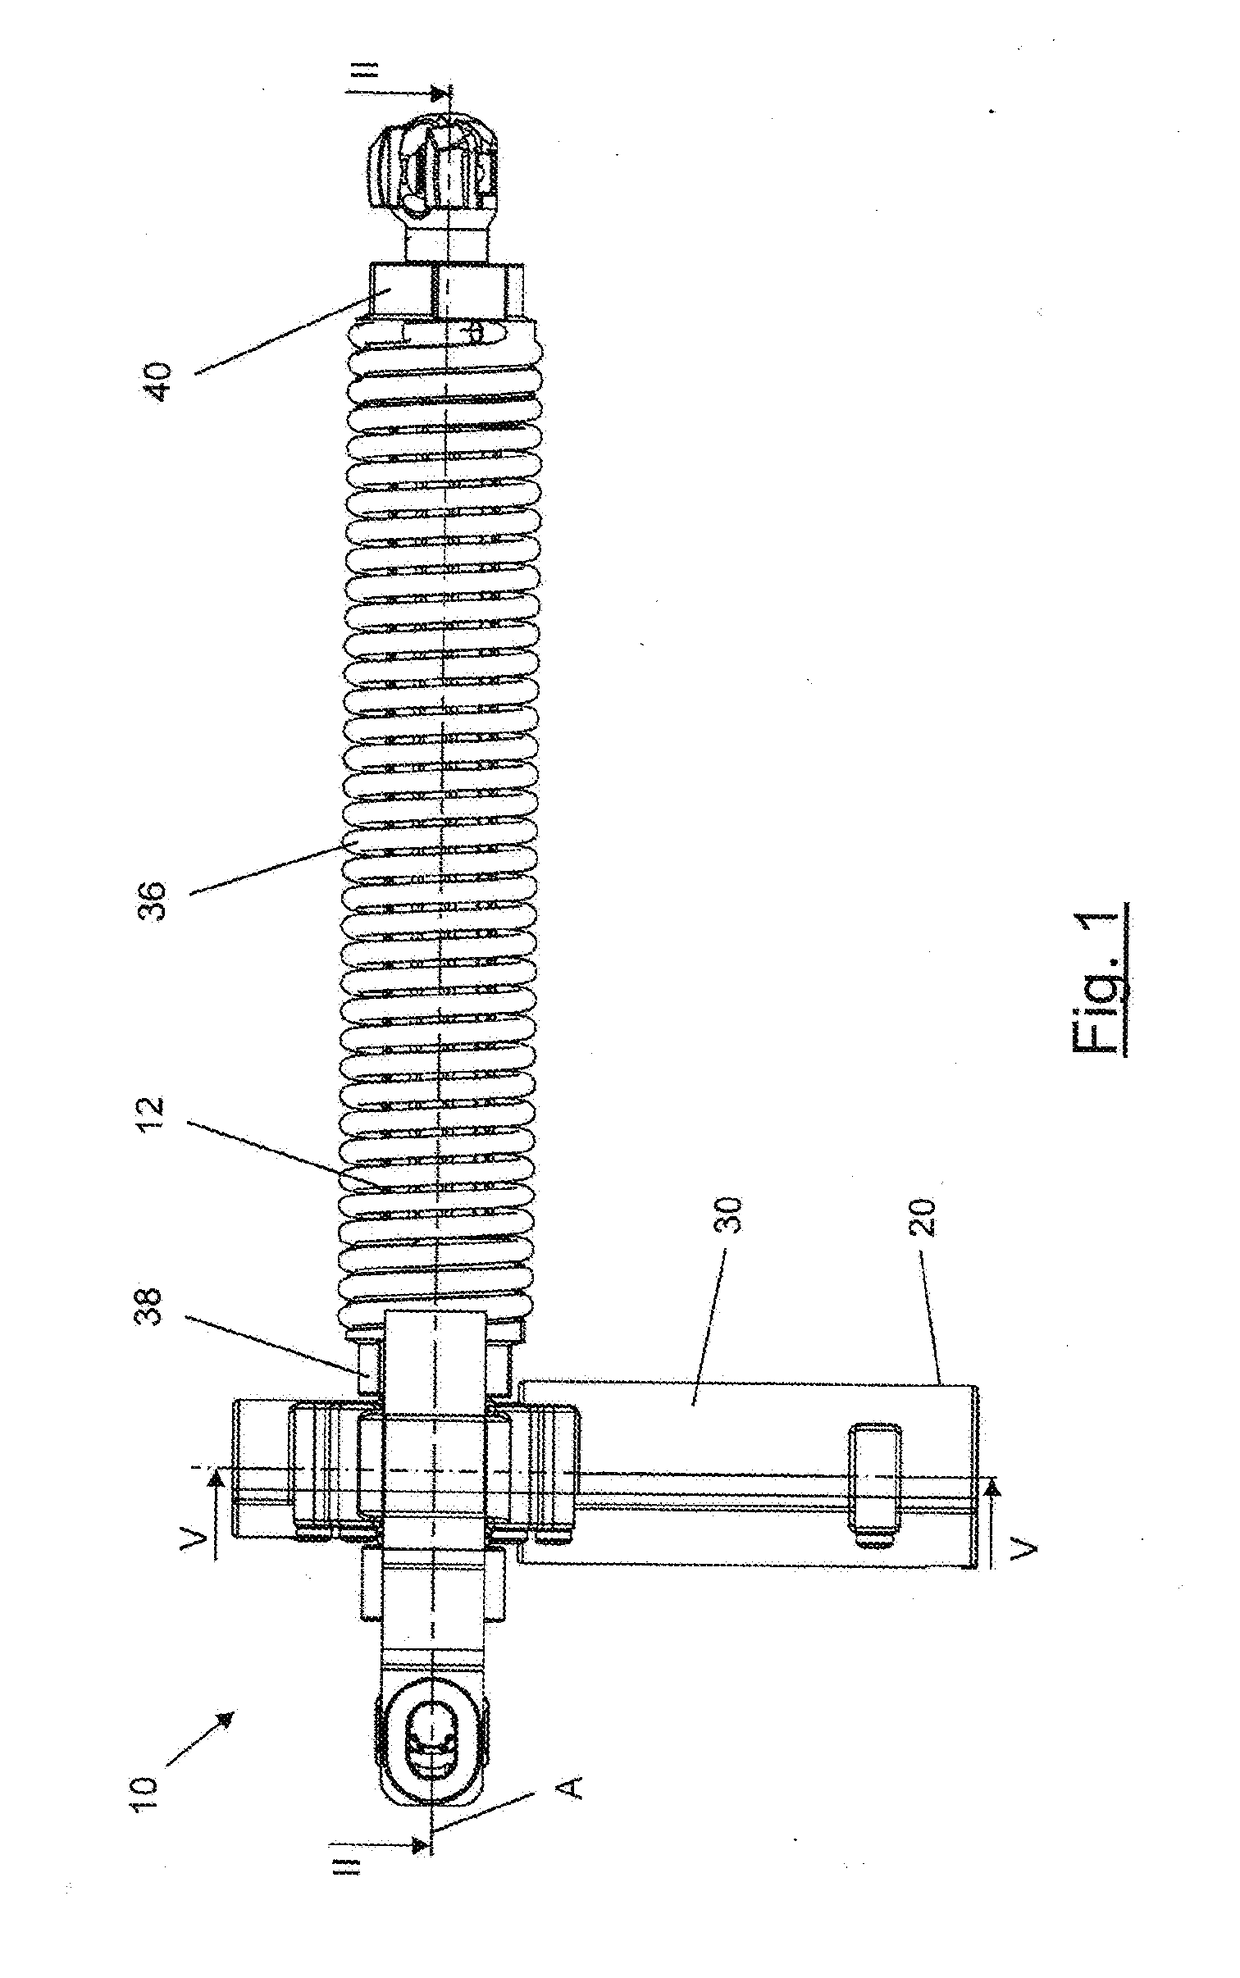 Spindle drive apparatus